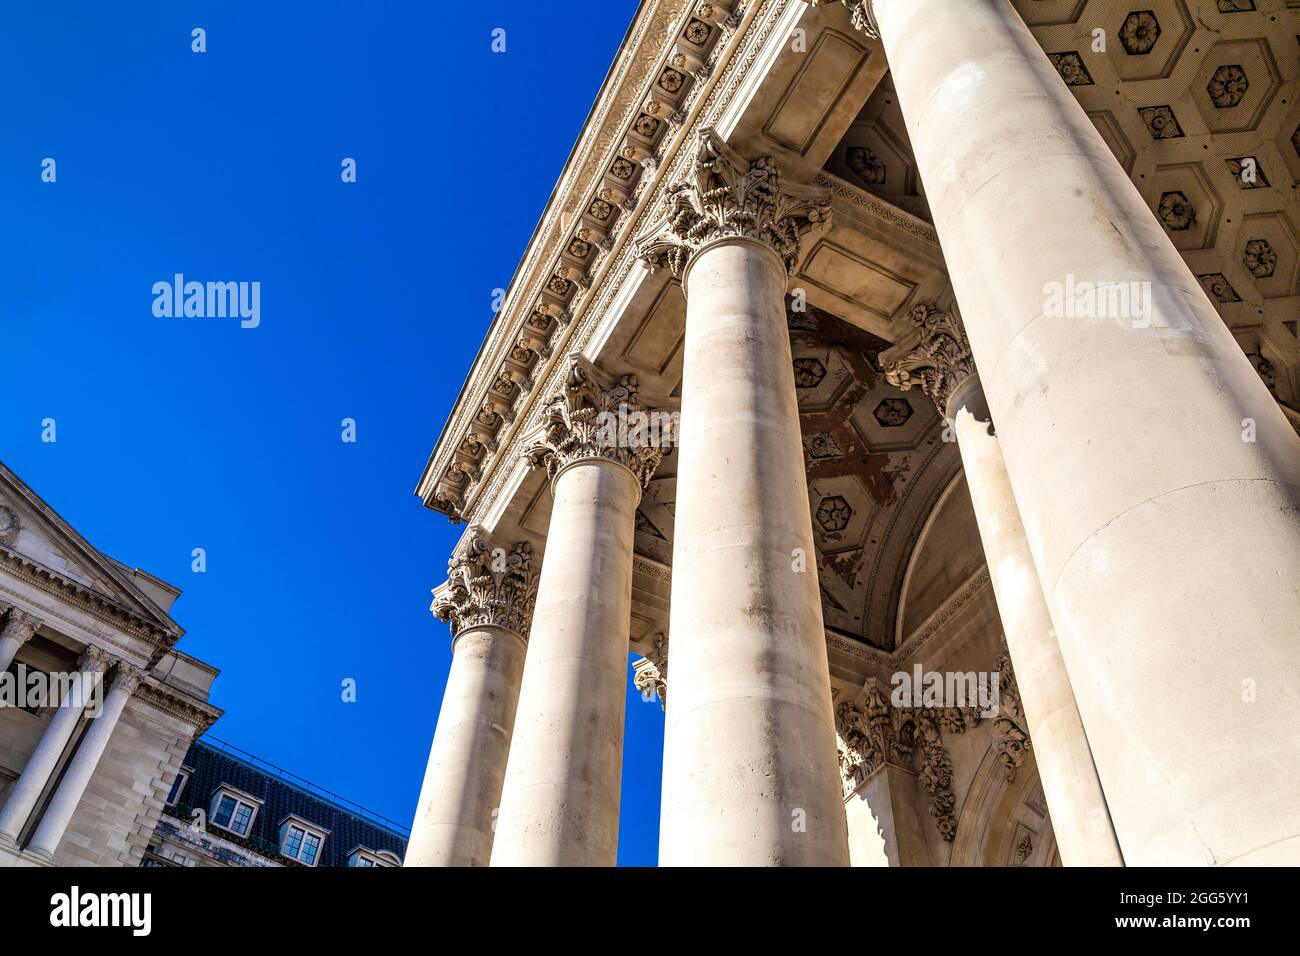 Exterior of the Royal Exchange building in Bank, former centre of commerce now a shopping arcade, City of London, UK Stock Photo